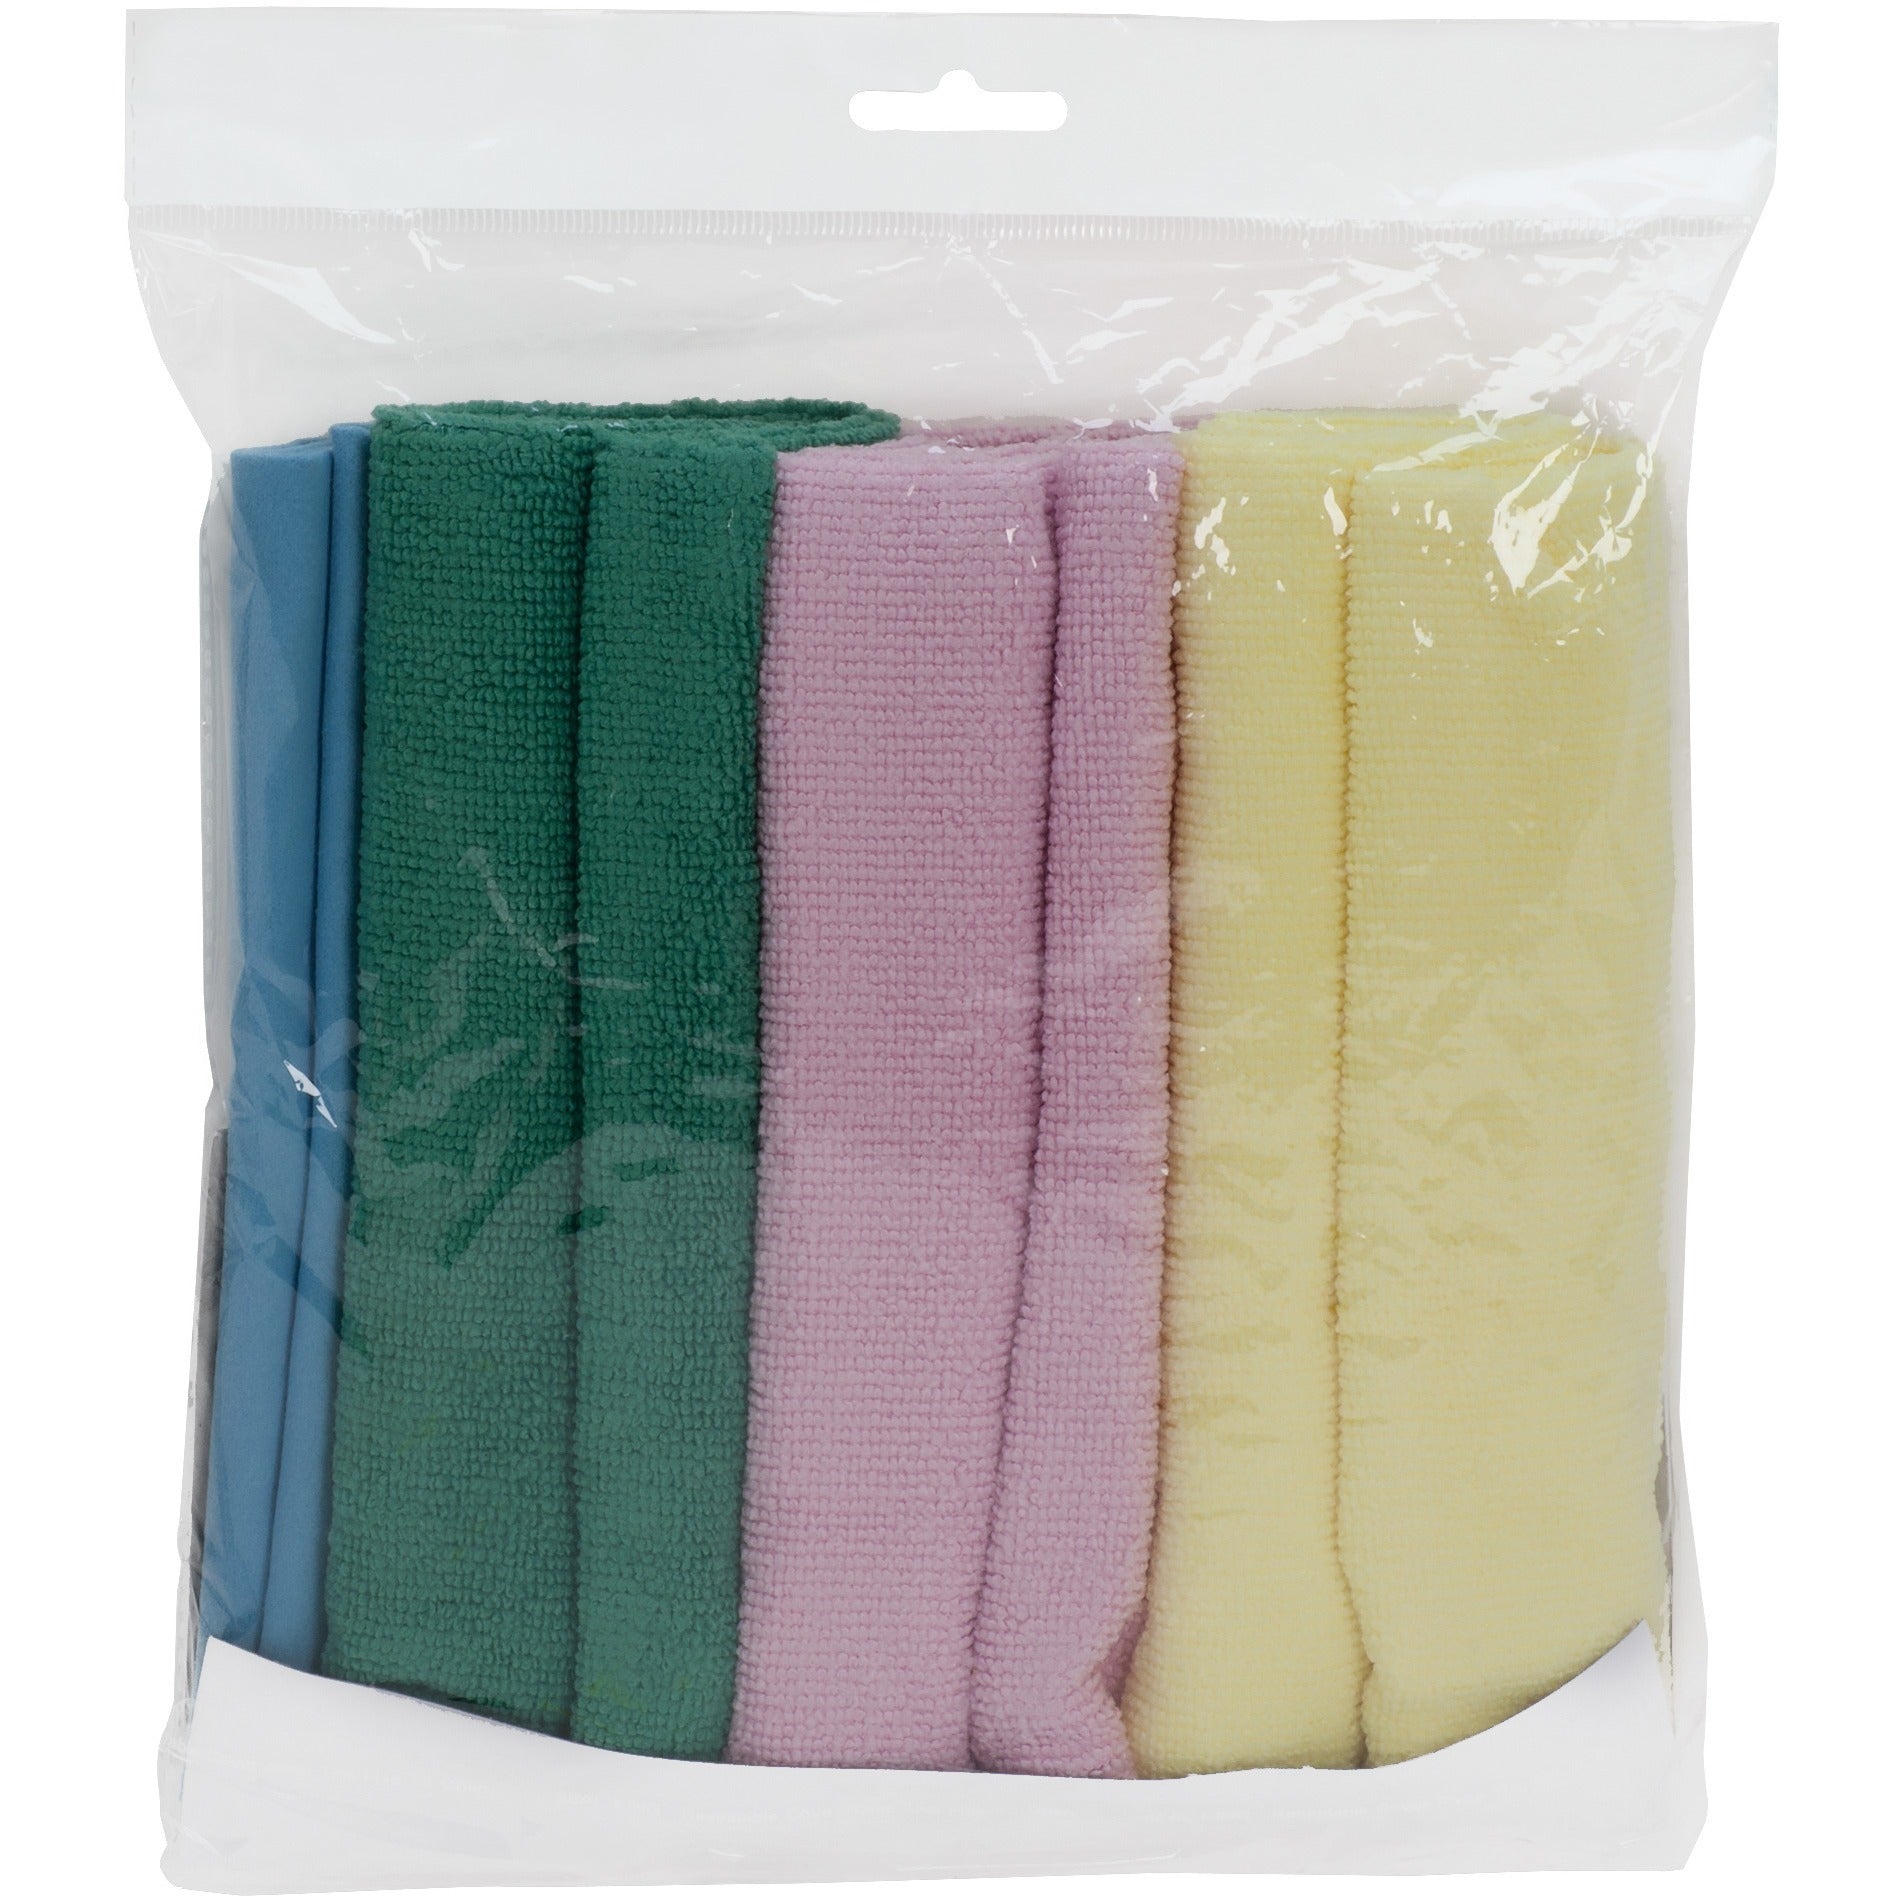 genuine-joe-color-coded-microfiber-cleaning-cloths-16-x-16-assorted-microfiber-lint-free-for-multipurpose-4-per-pack-36-carton_gjo48261ct - 2